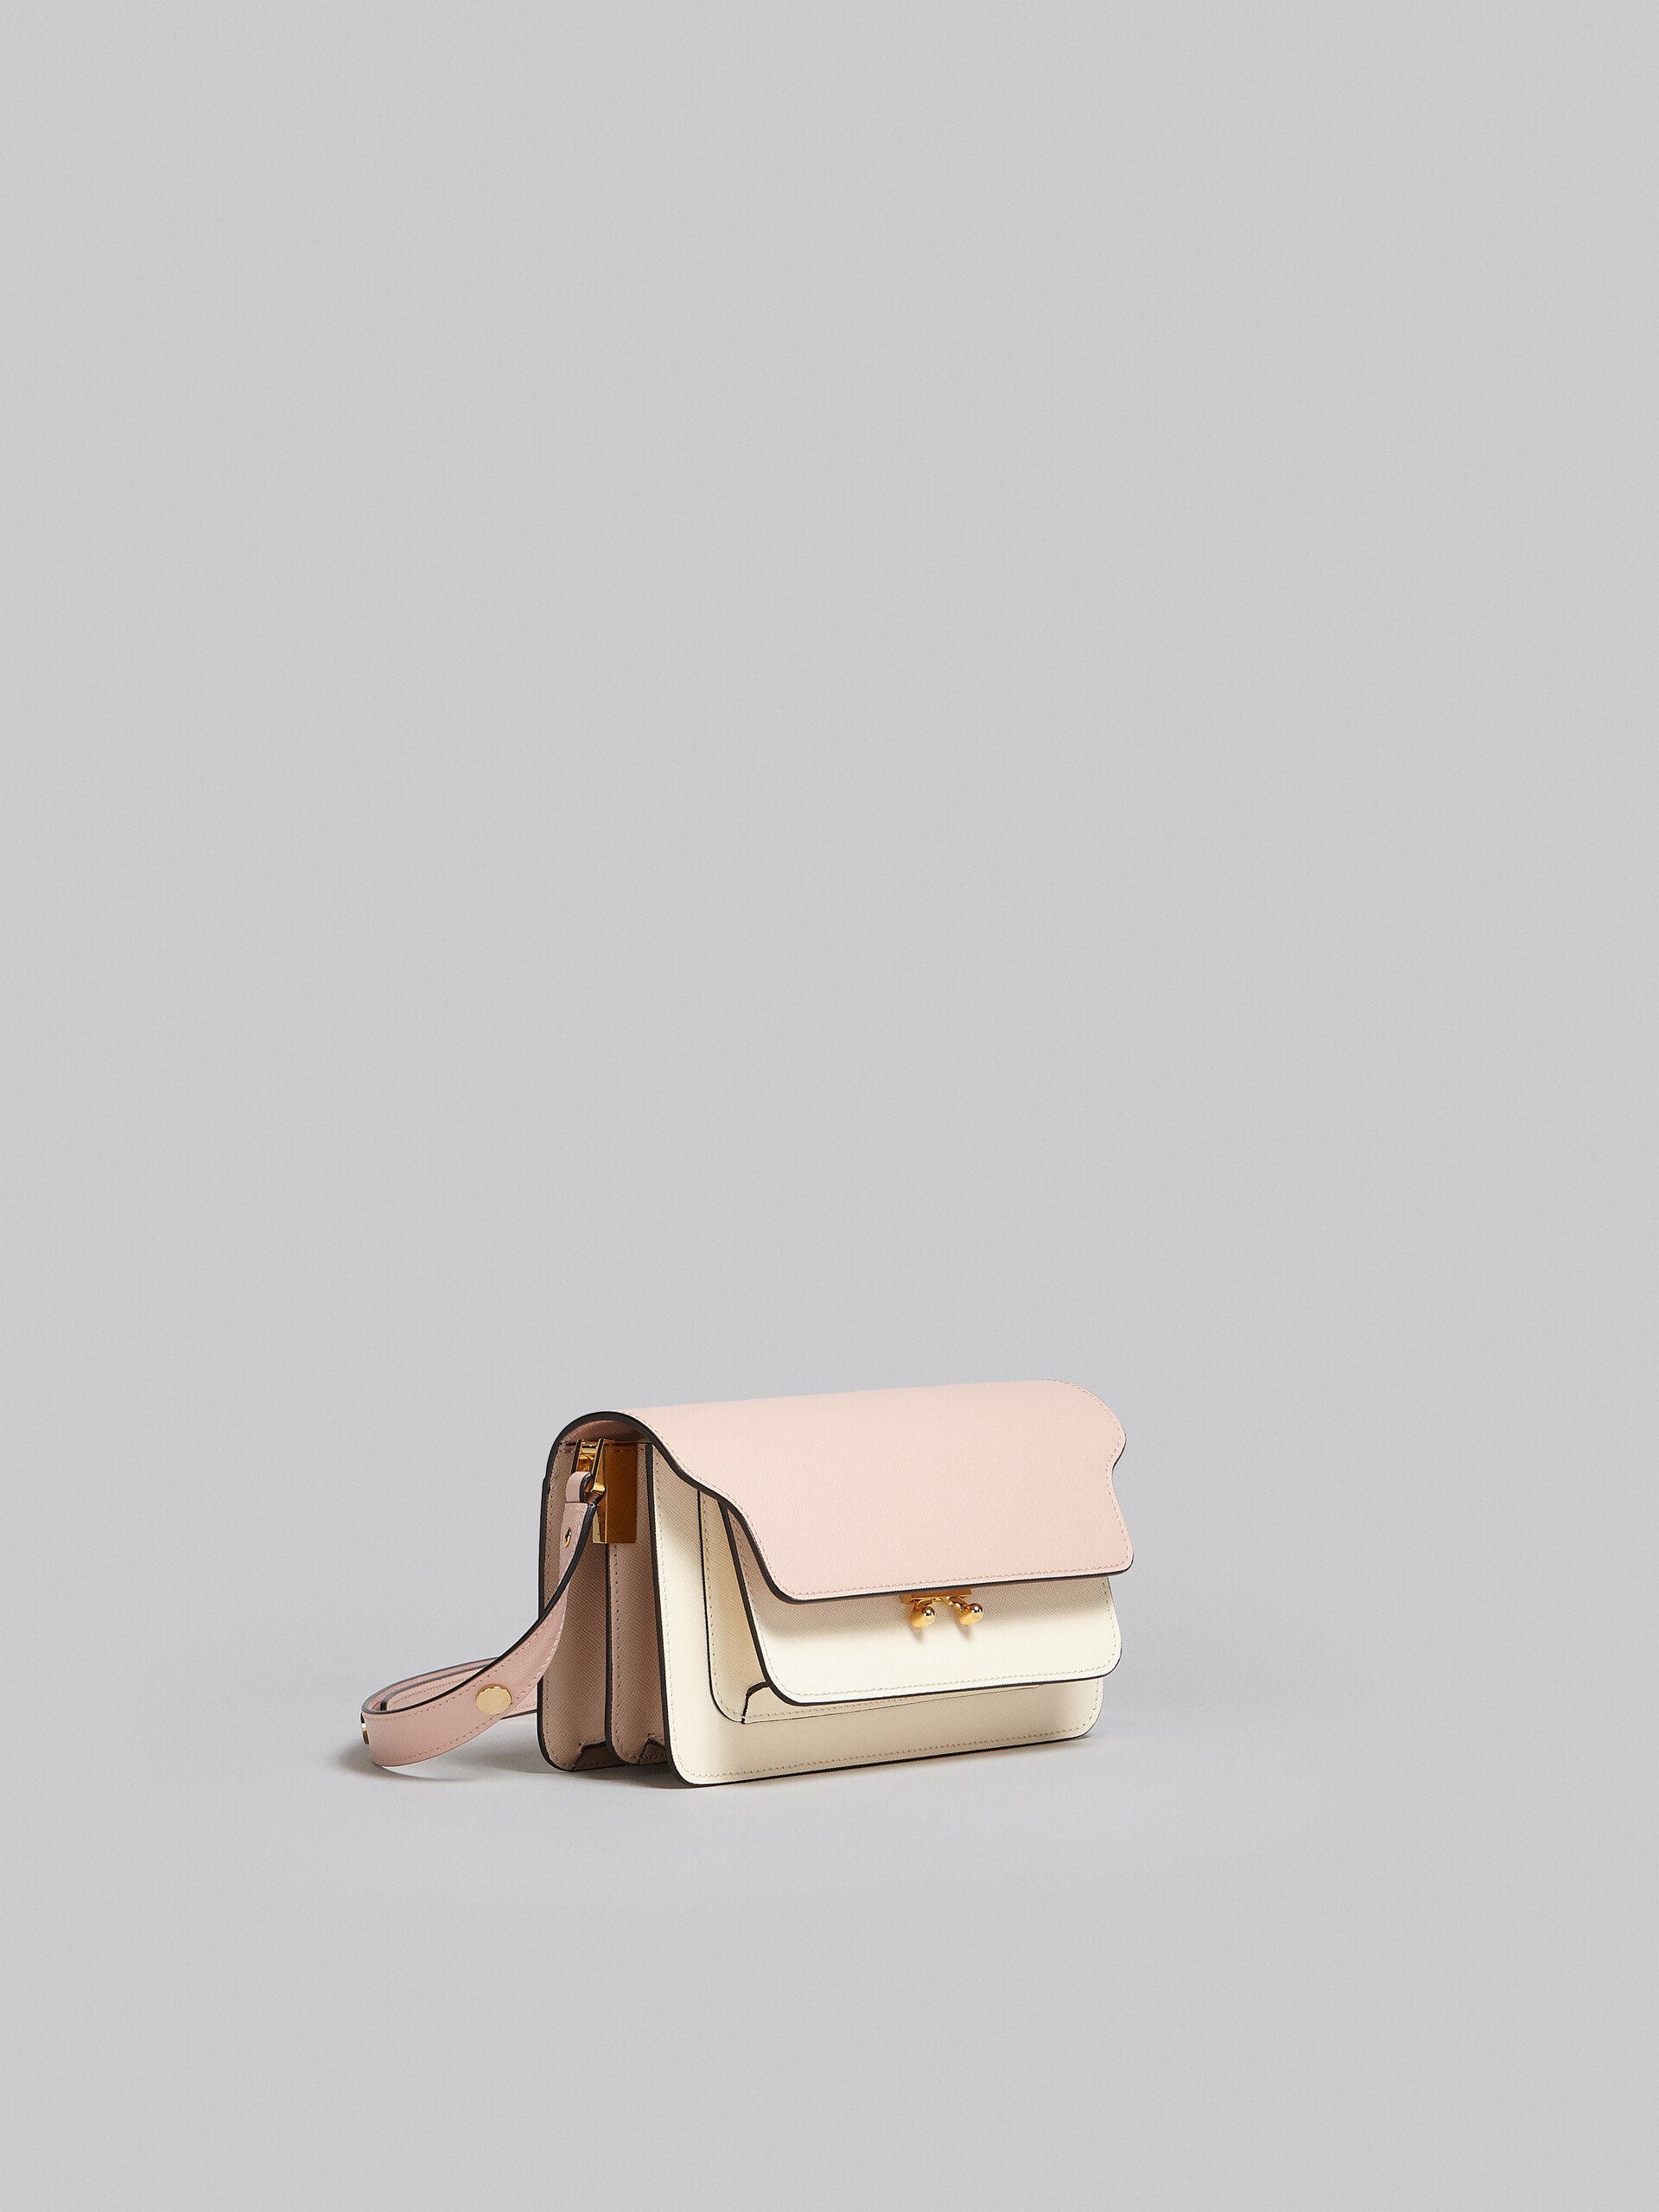 Trunk Bag E/W in pink and white saffiano leather - Shoulder Bag - Image 6